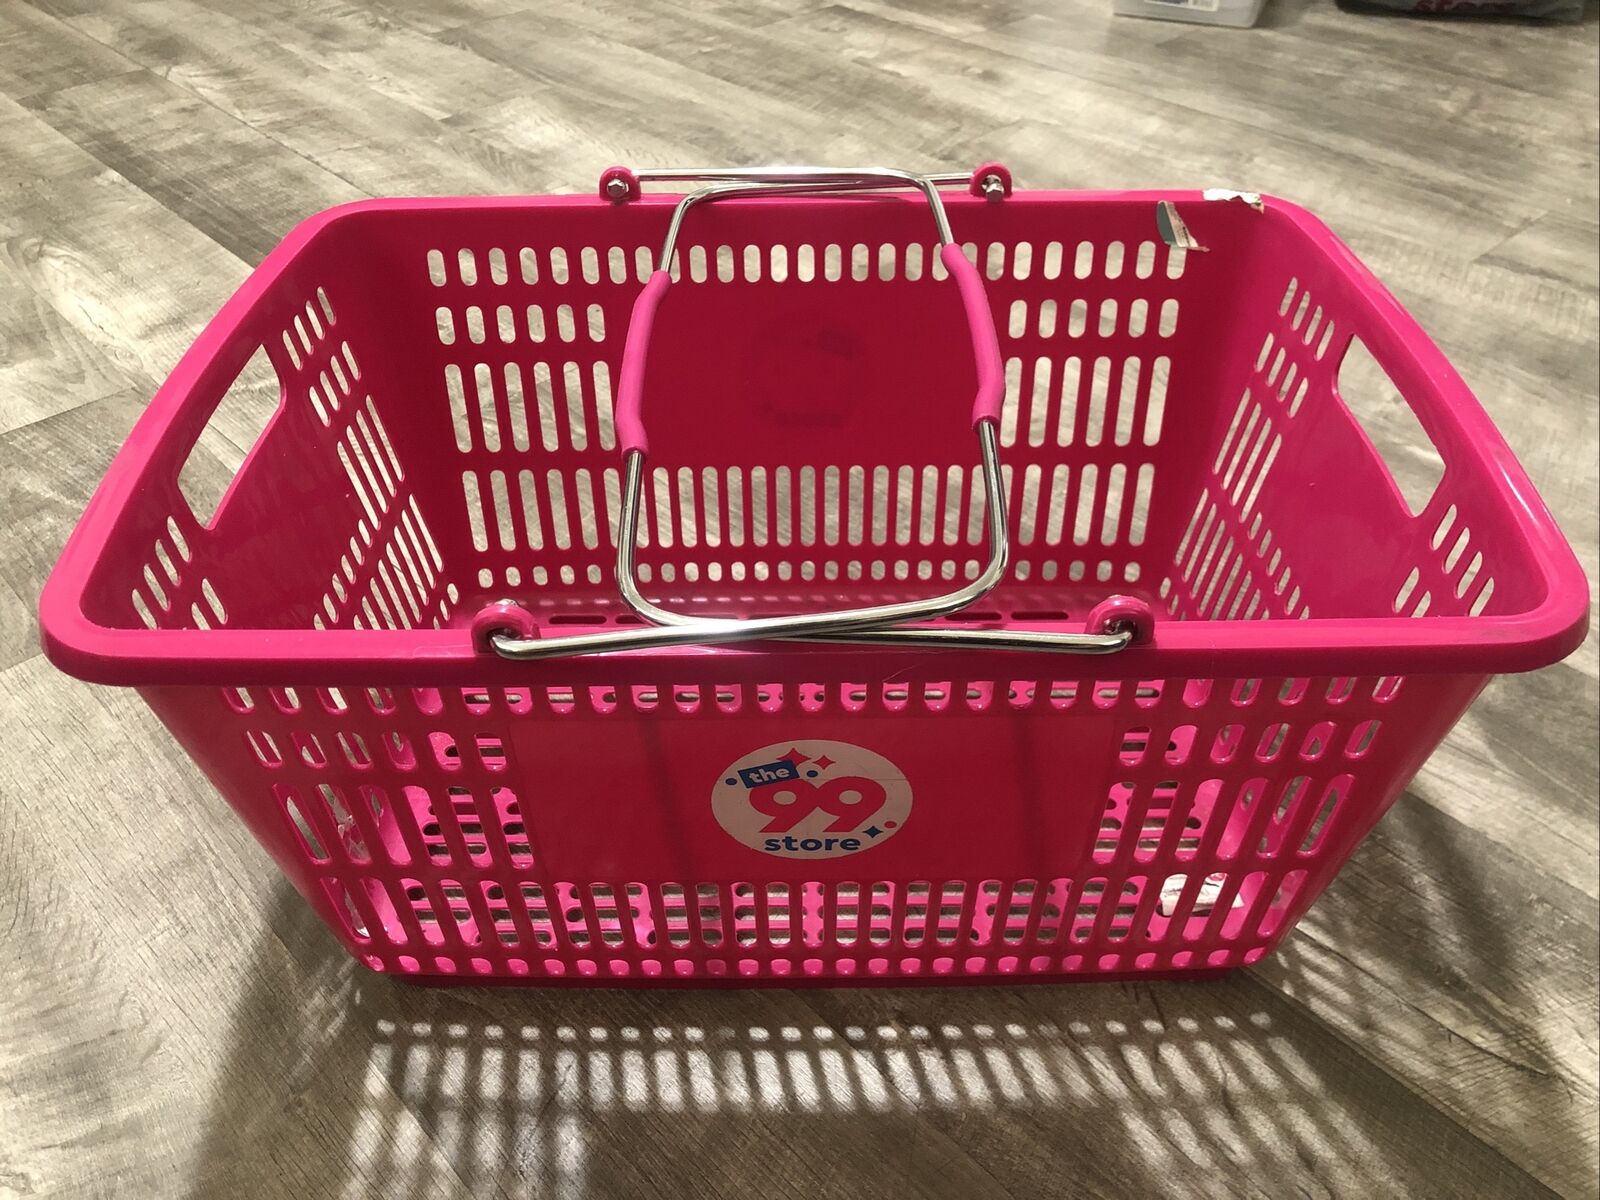 99 CENTS ONLY CLOSED STORE RARE  Shopping HAND BASKET 2nd DEEP \'PINK\' COLOR 🛒👀